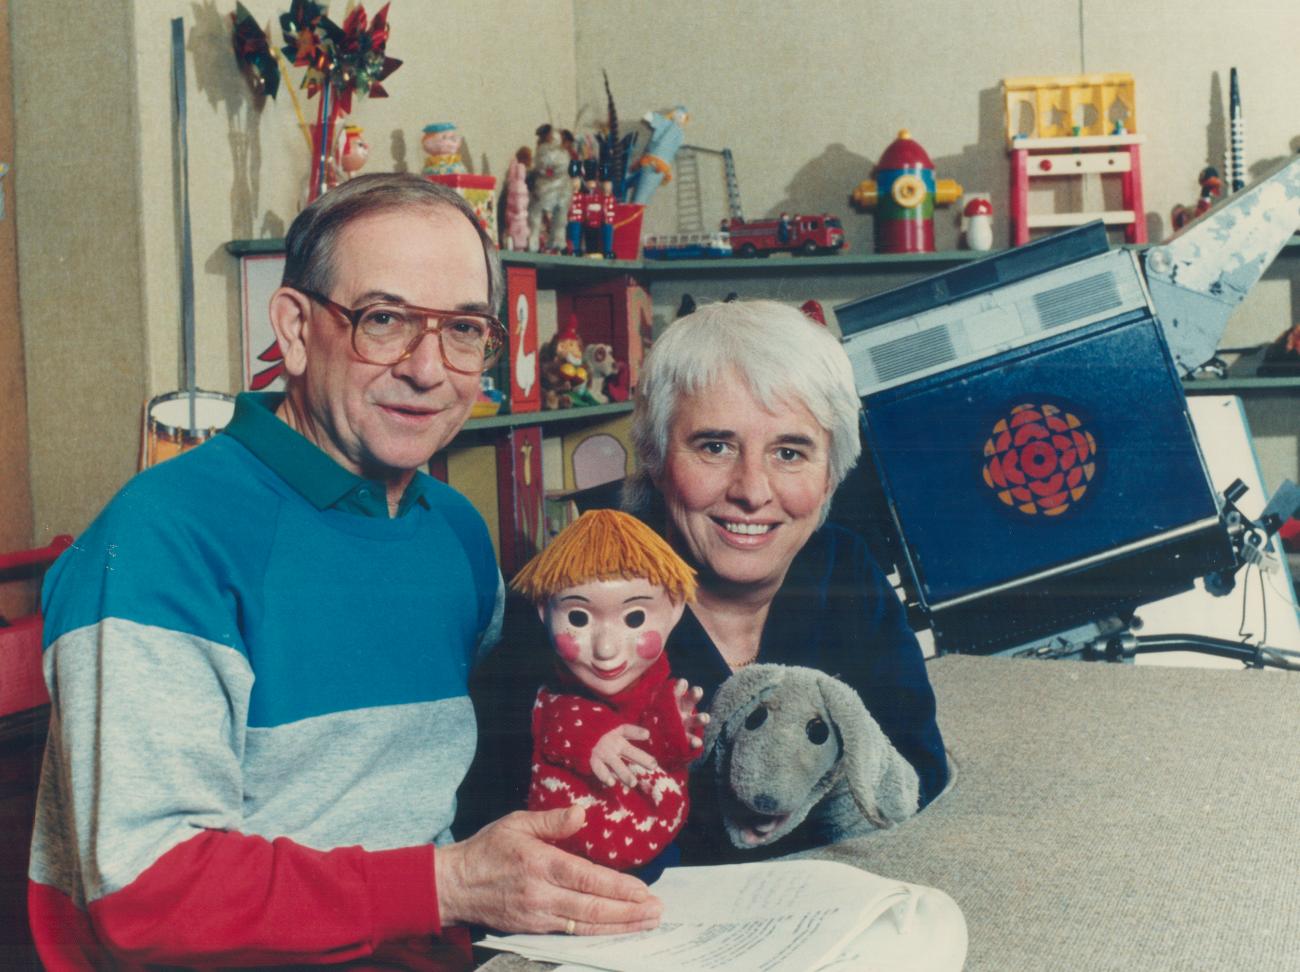 Ernie Coombs and a woman with two puppets.